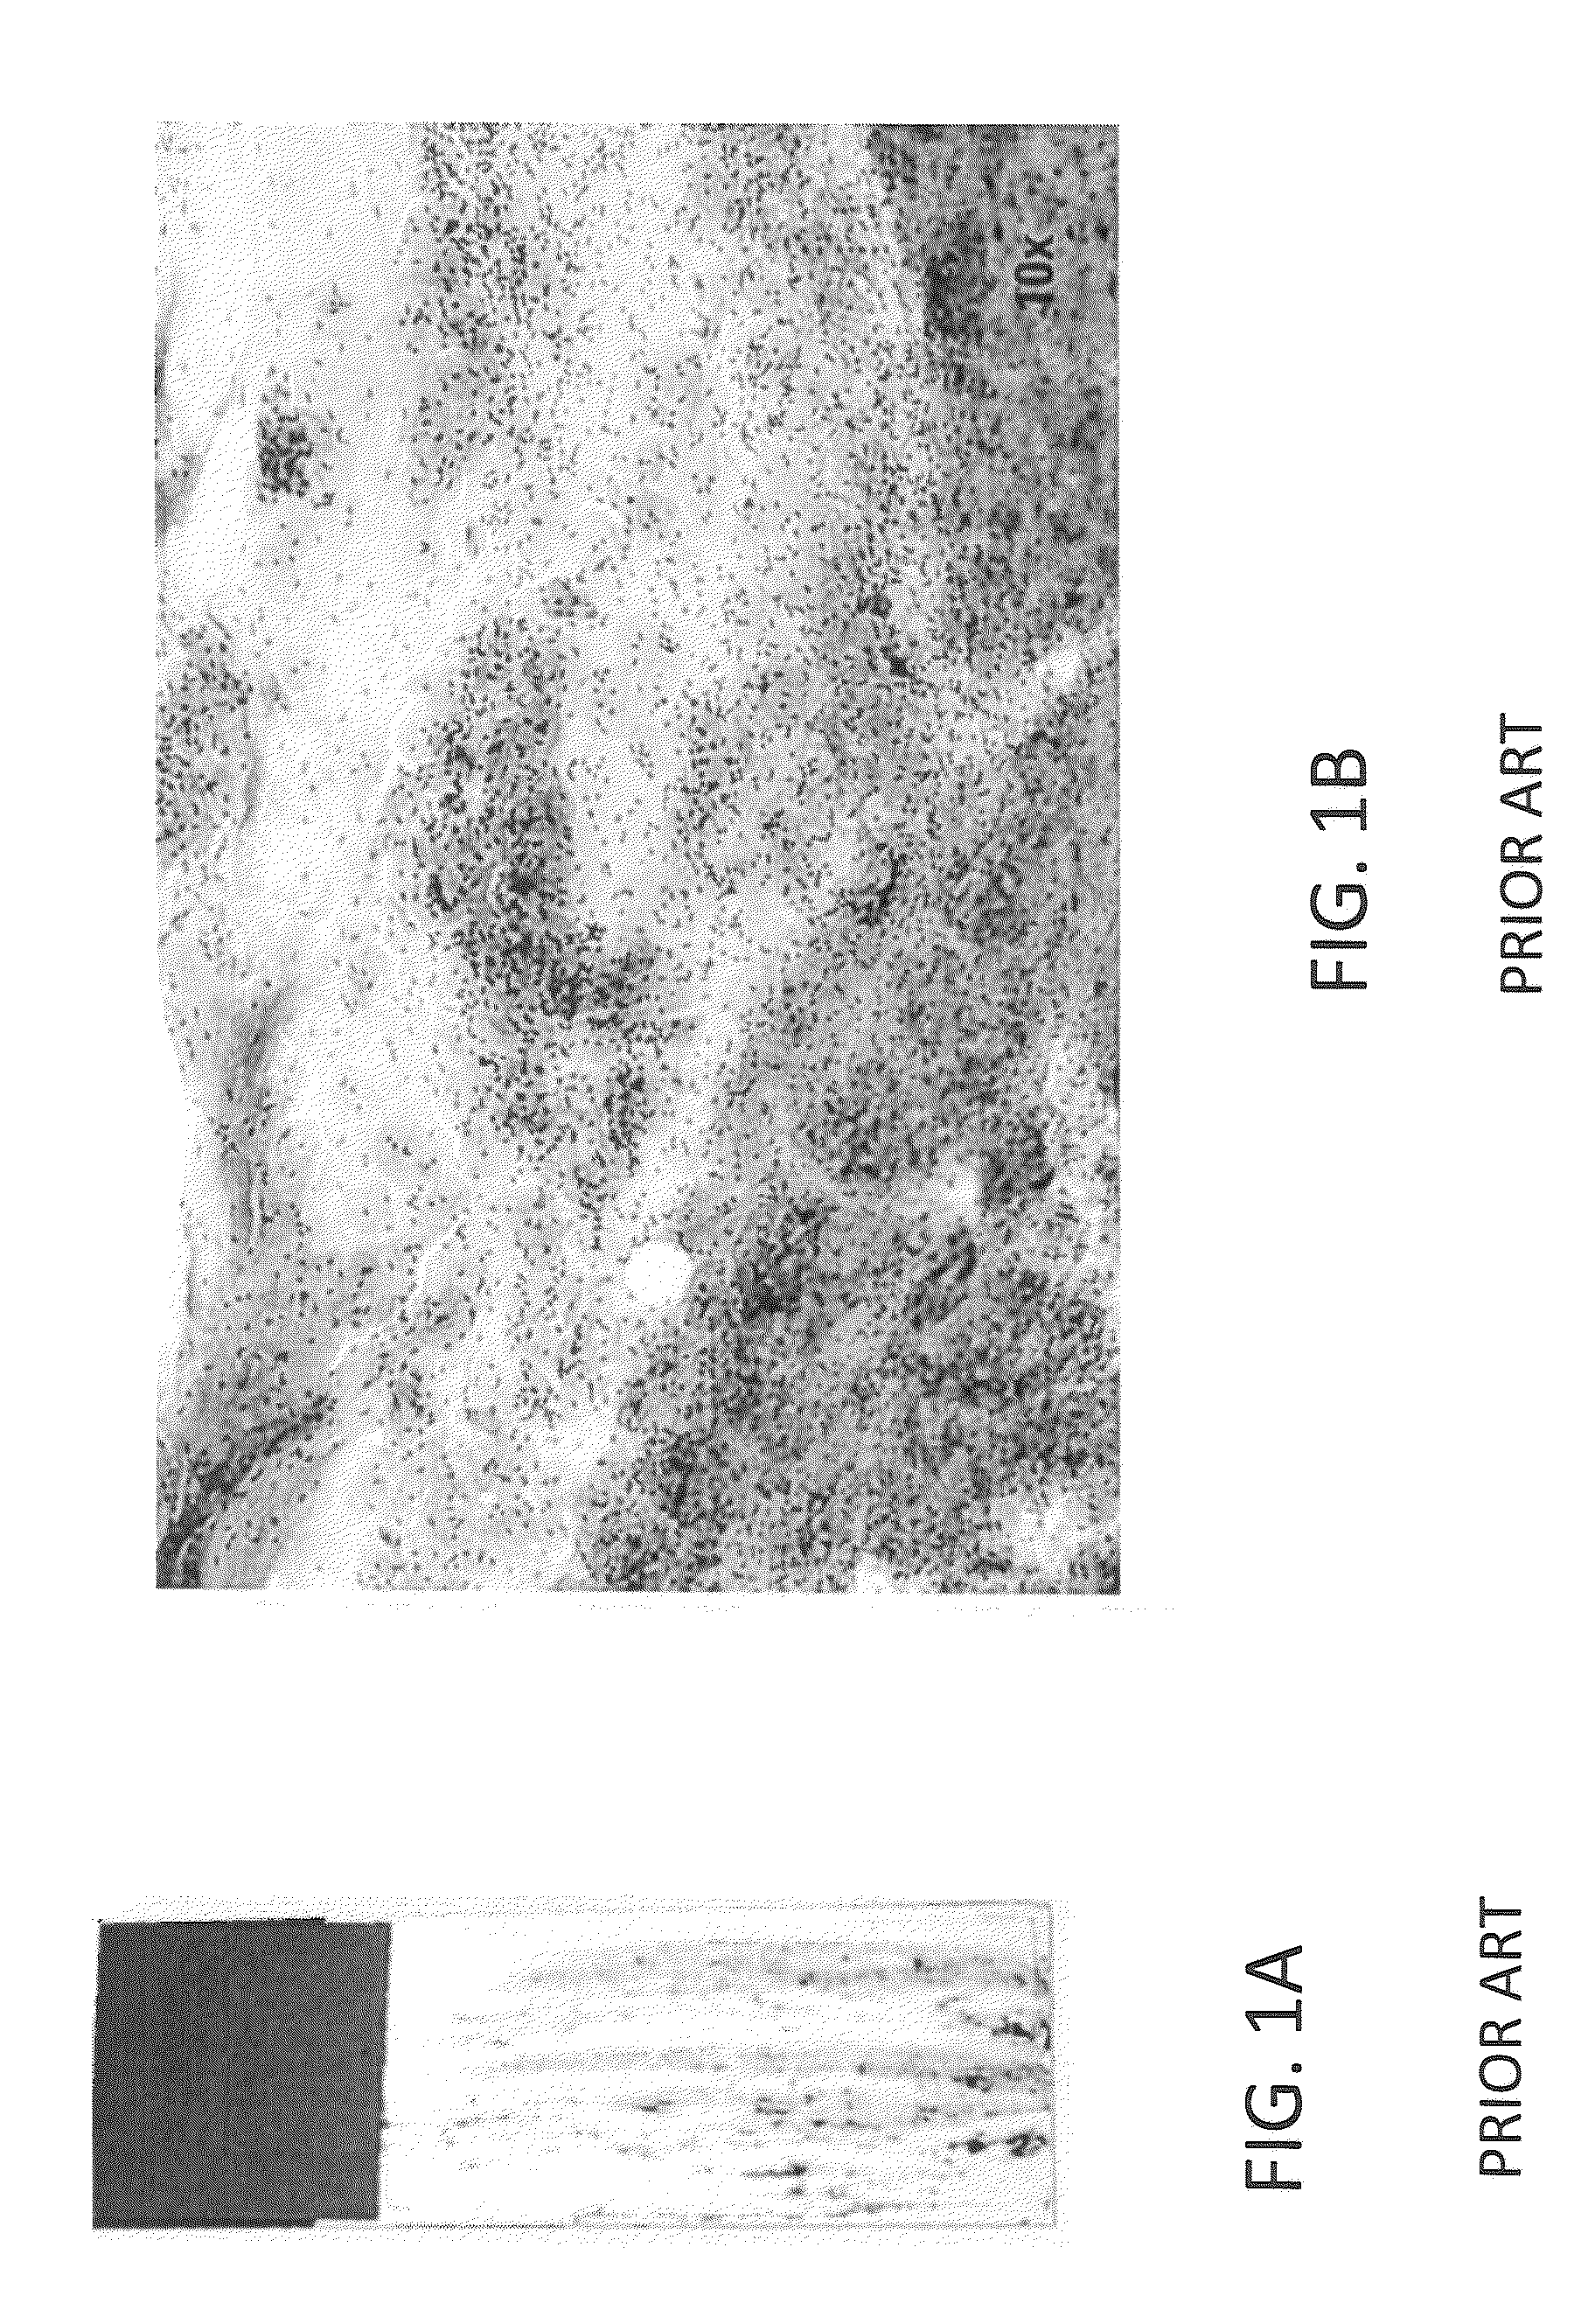 Method and system for analyzing biological specimens by spectral imaging